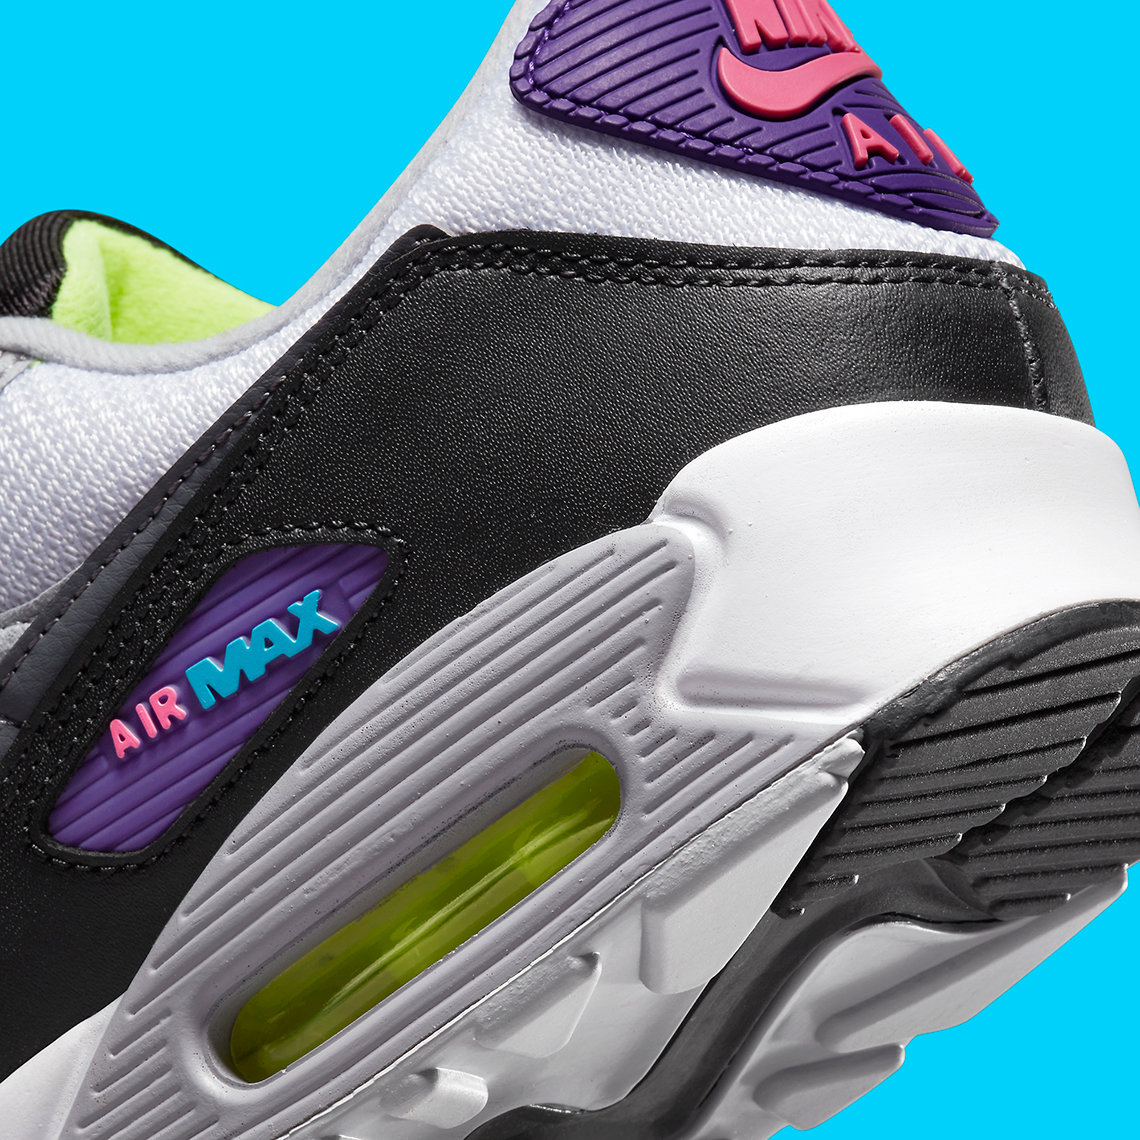 nike-air-max-90-what-the-dr9900-100-release-date-4.jpg